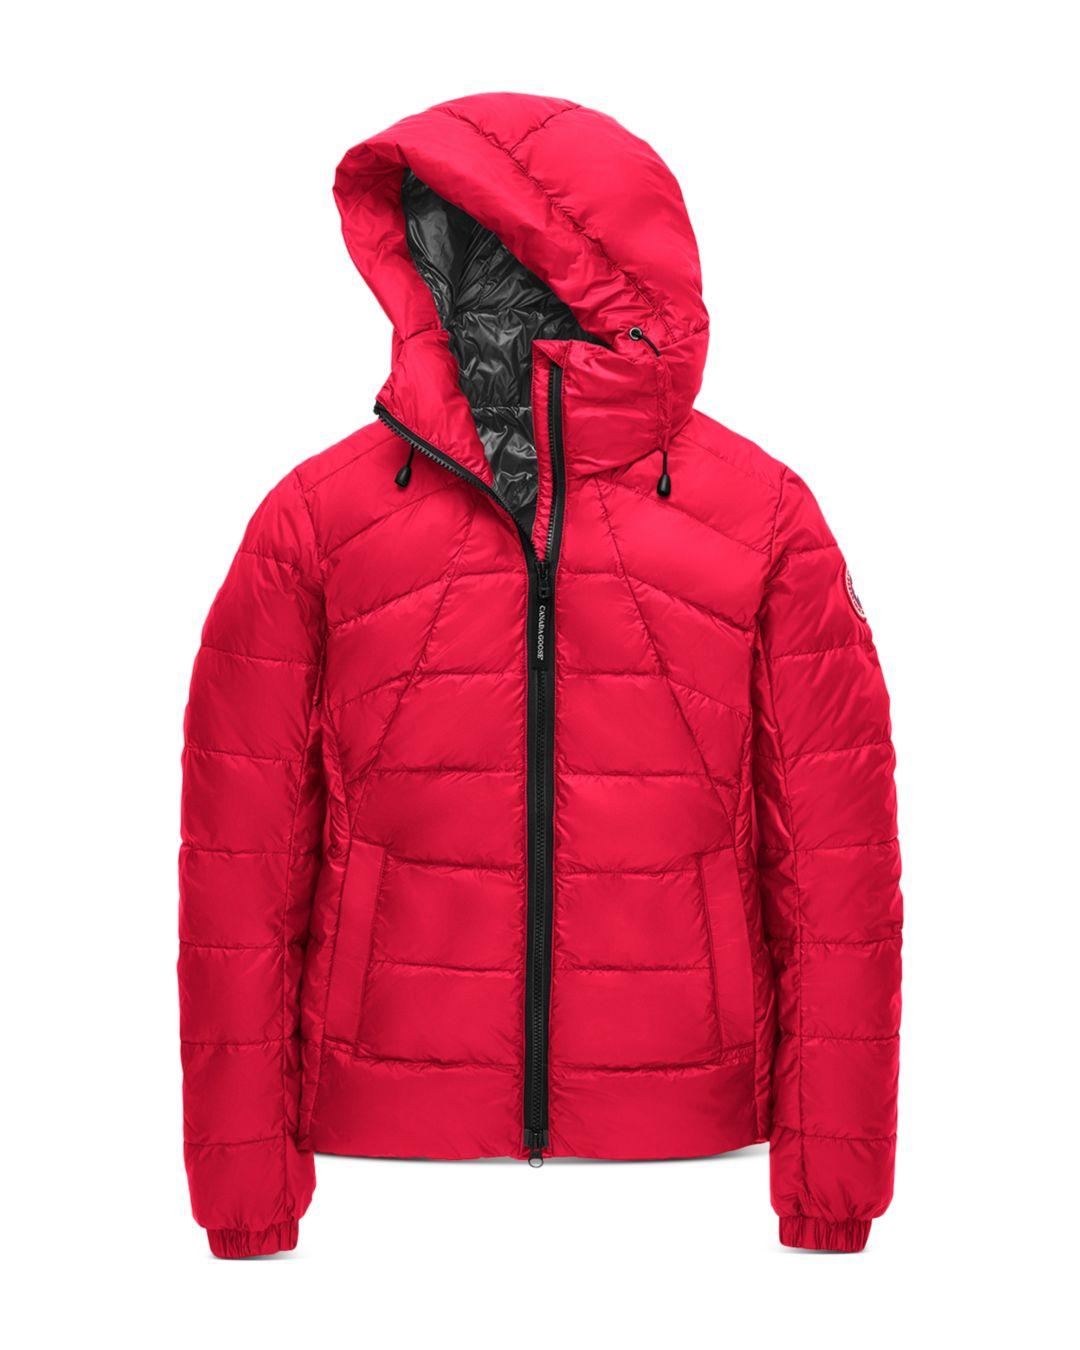 Canada Goose Goose Abbott Hoody Packable Down Jacket in Red - Save 